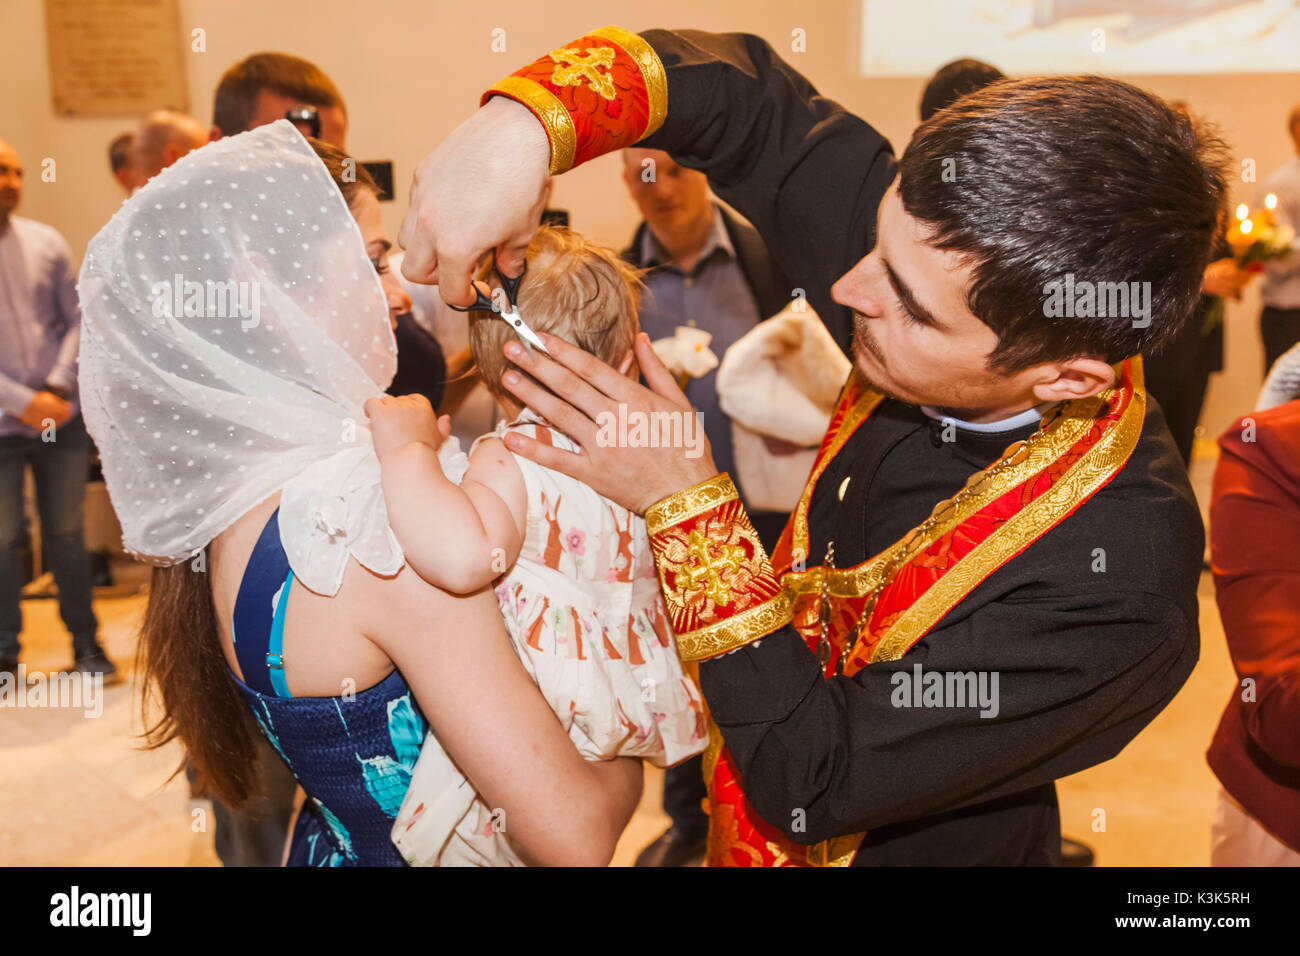 England, London, The City, Bishopsgate, St.Nicholas Orthodox Church, Baptismal and First Hair Cutting Ceremony, Orthodox Priest Cutting Baby's Hair Stock Photo